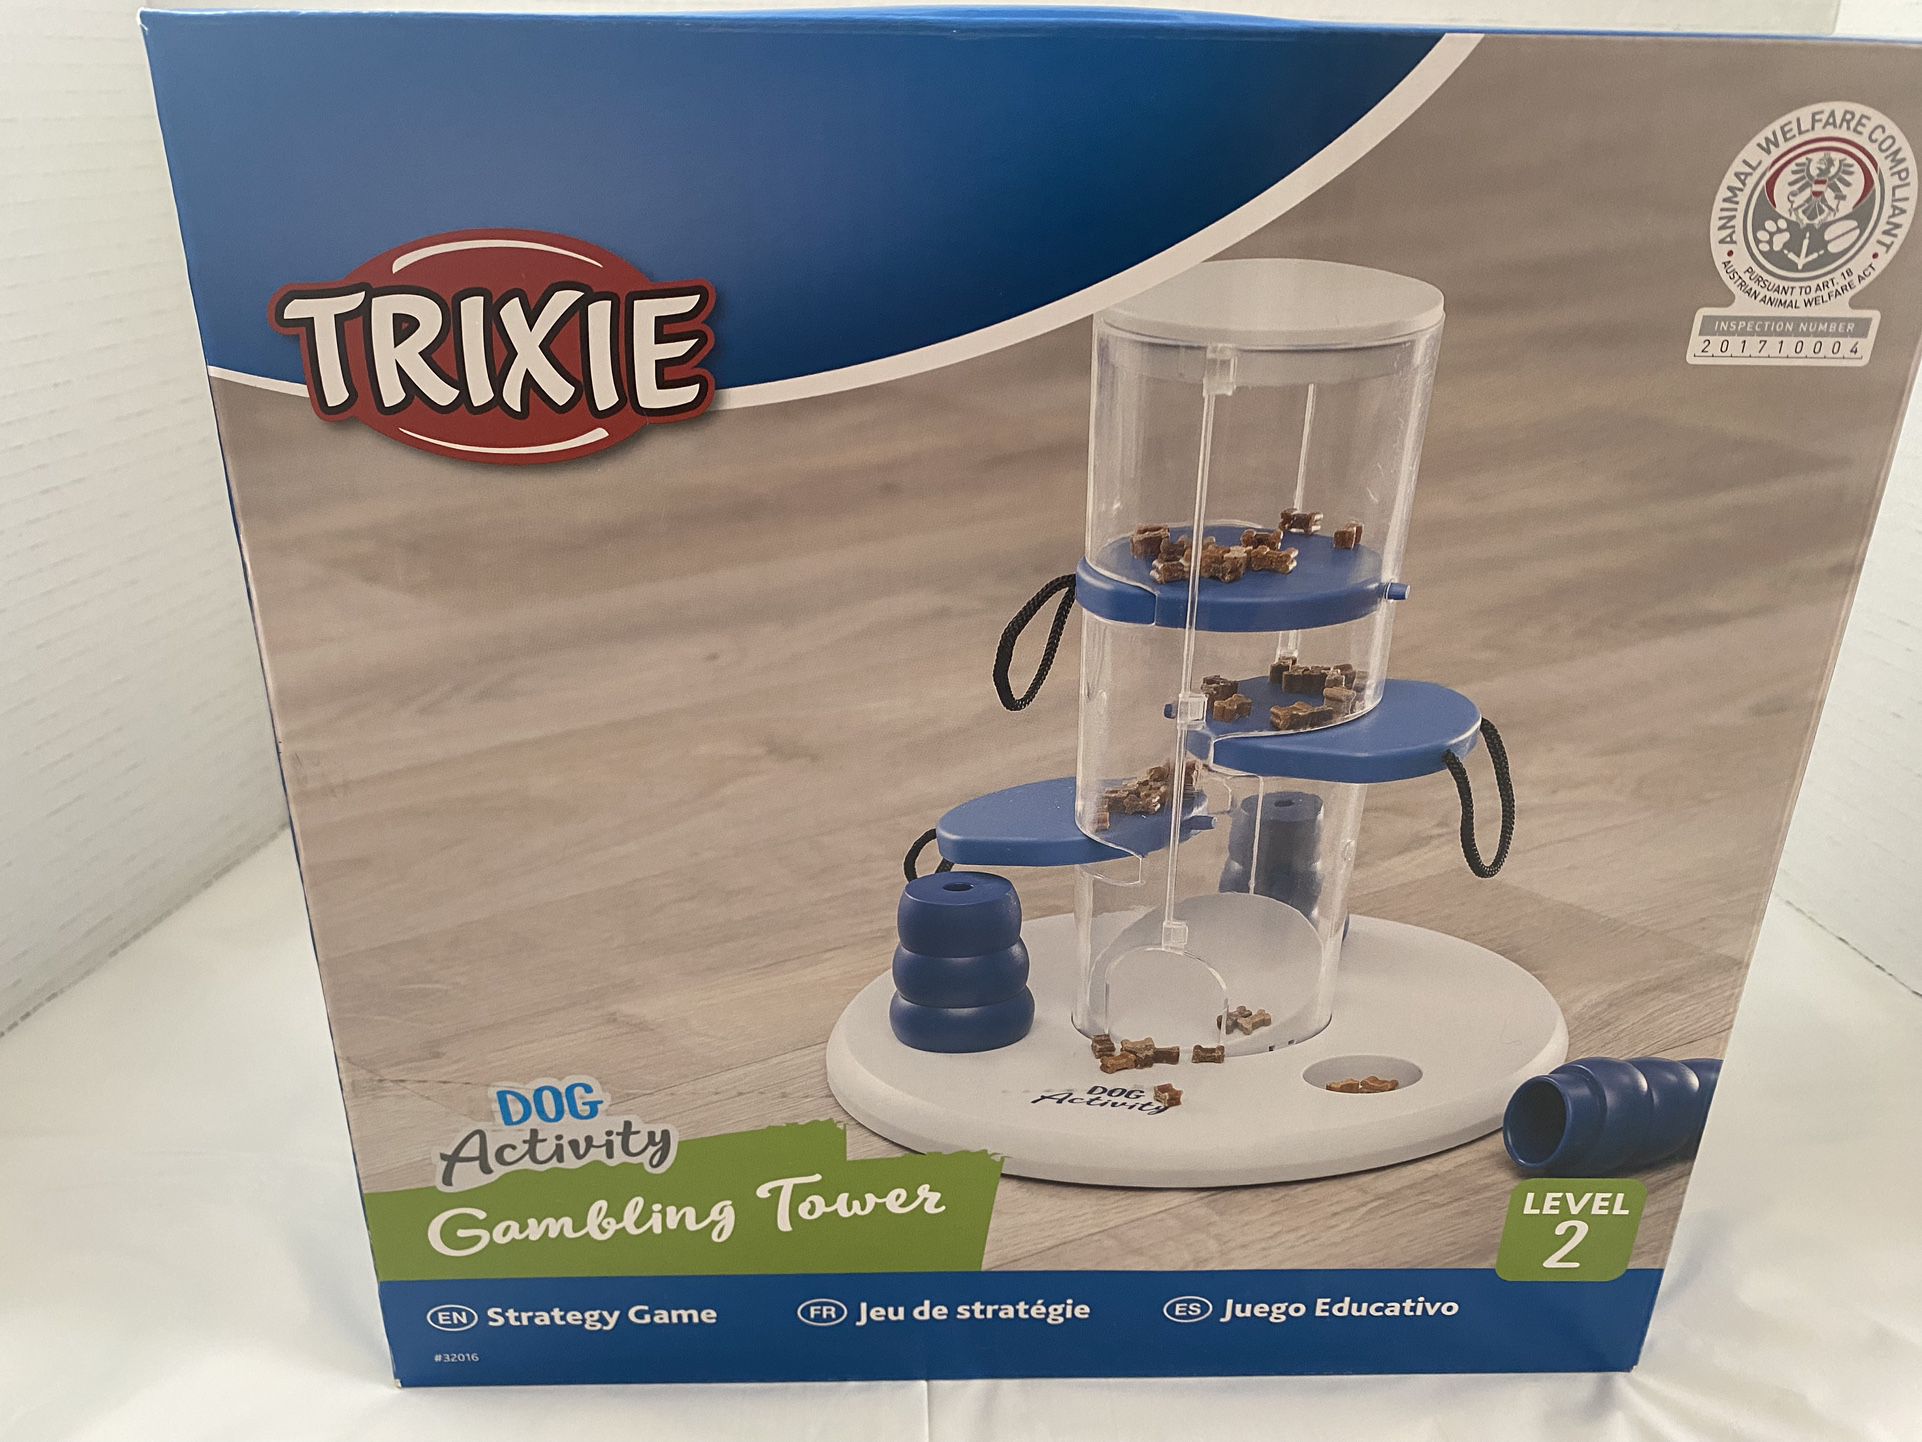 Trixie Dog Activity Gambling Tower Strategy Game Puppy Training